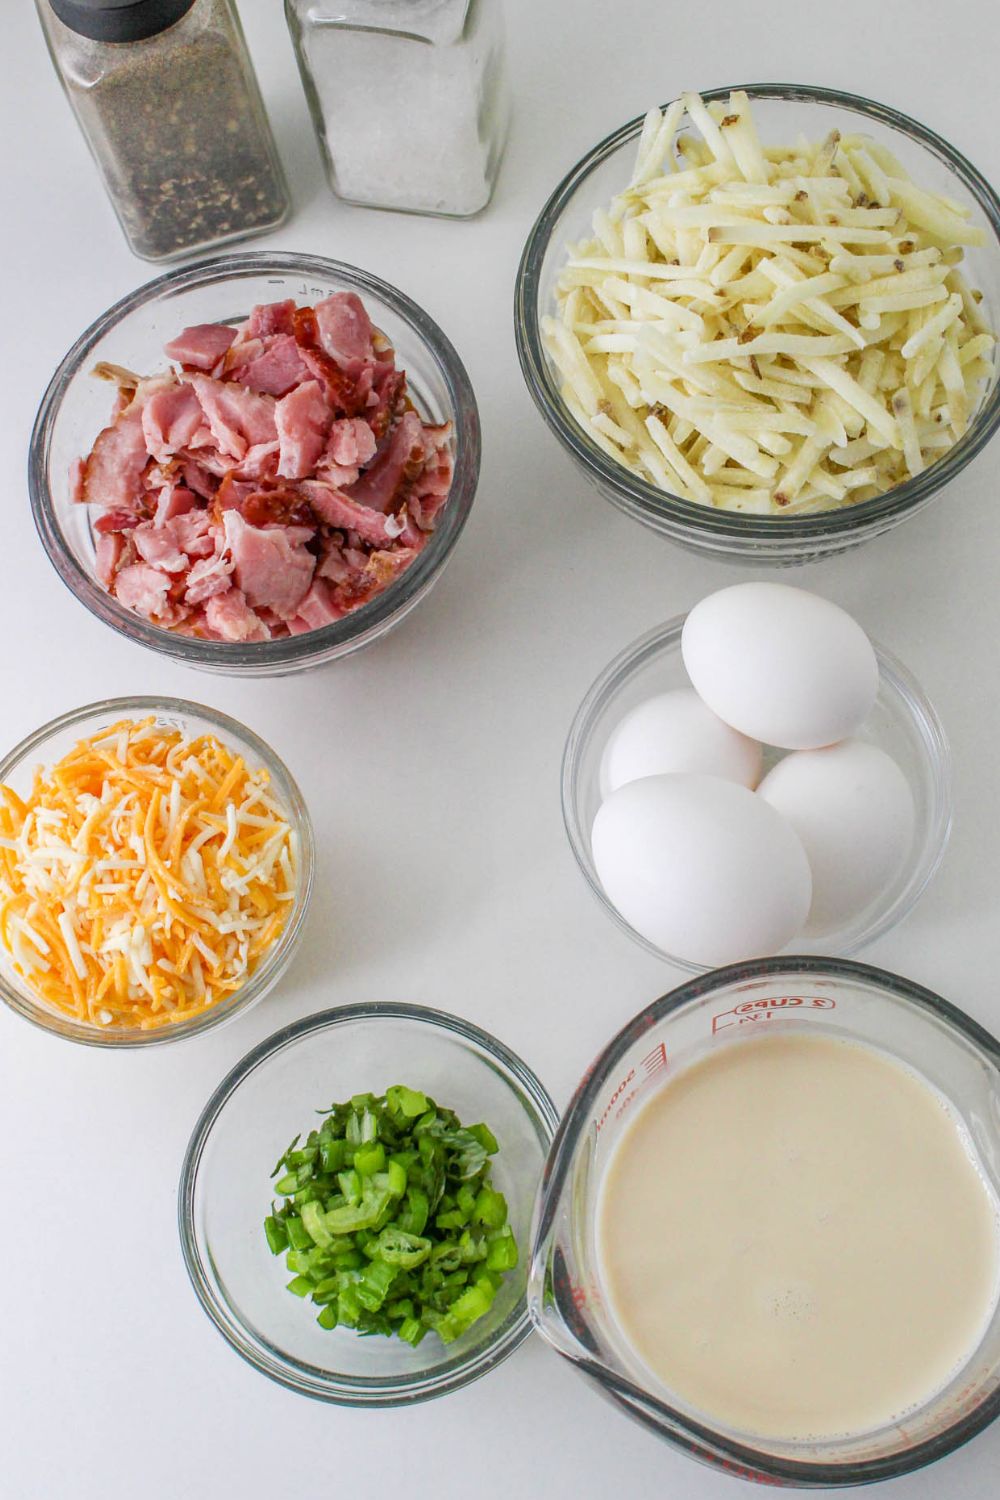 ingredients for breakfast casserole each in a small glass bowl on table 